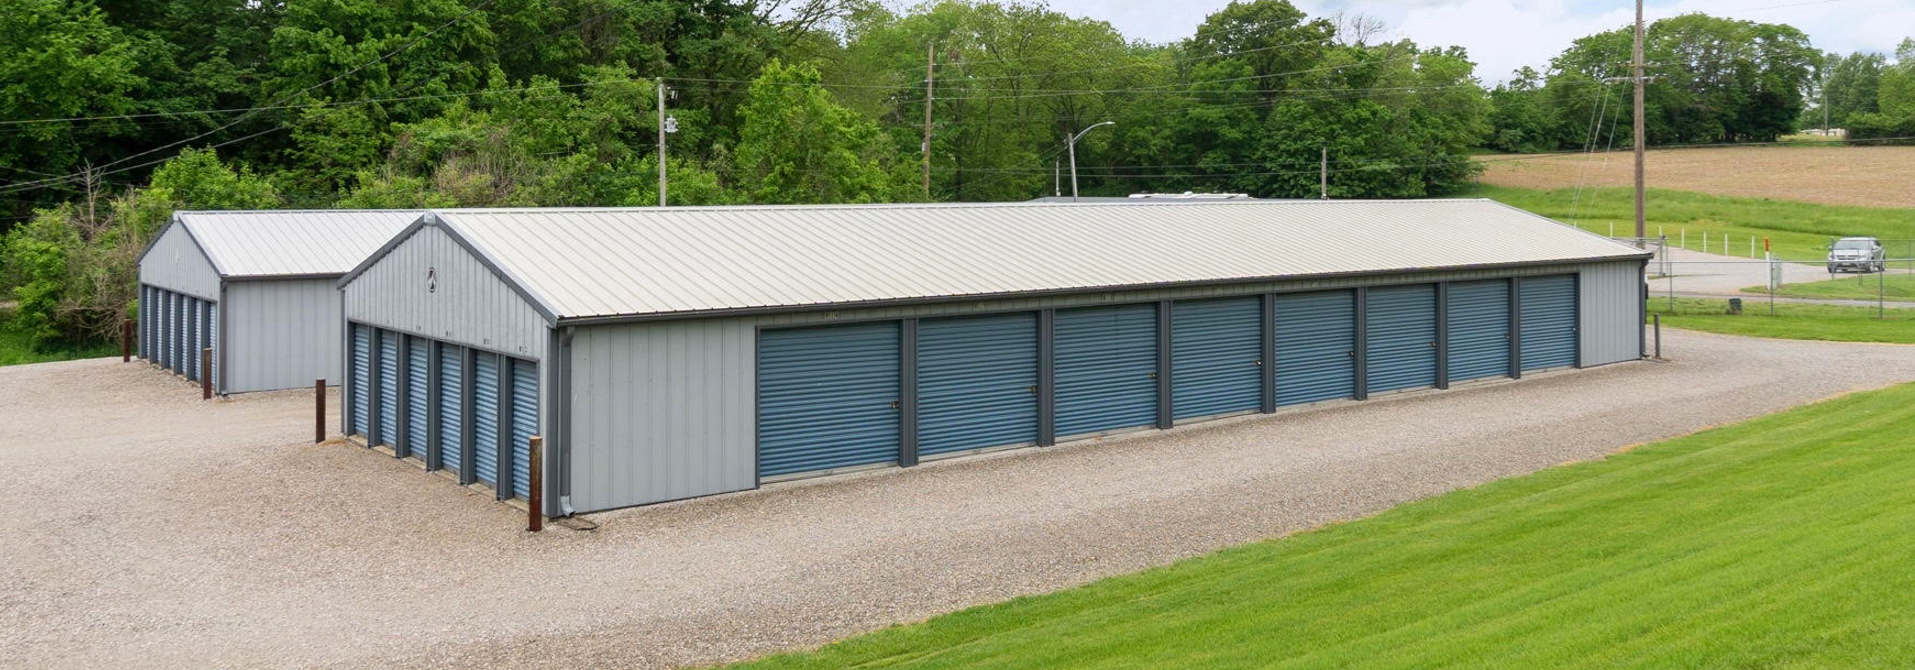 Secure, Safe and Gated Storage Facility with 24-hour Security Cameras in Chester, IL